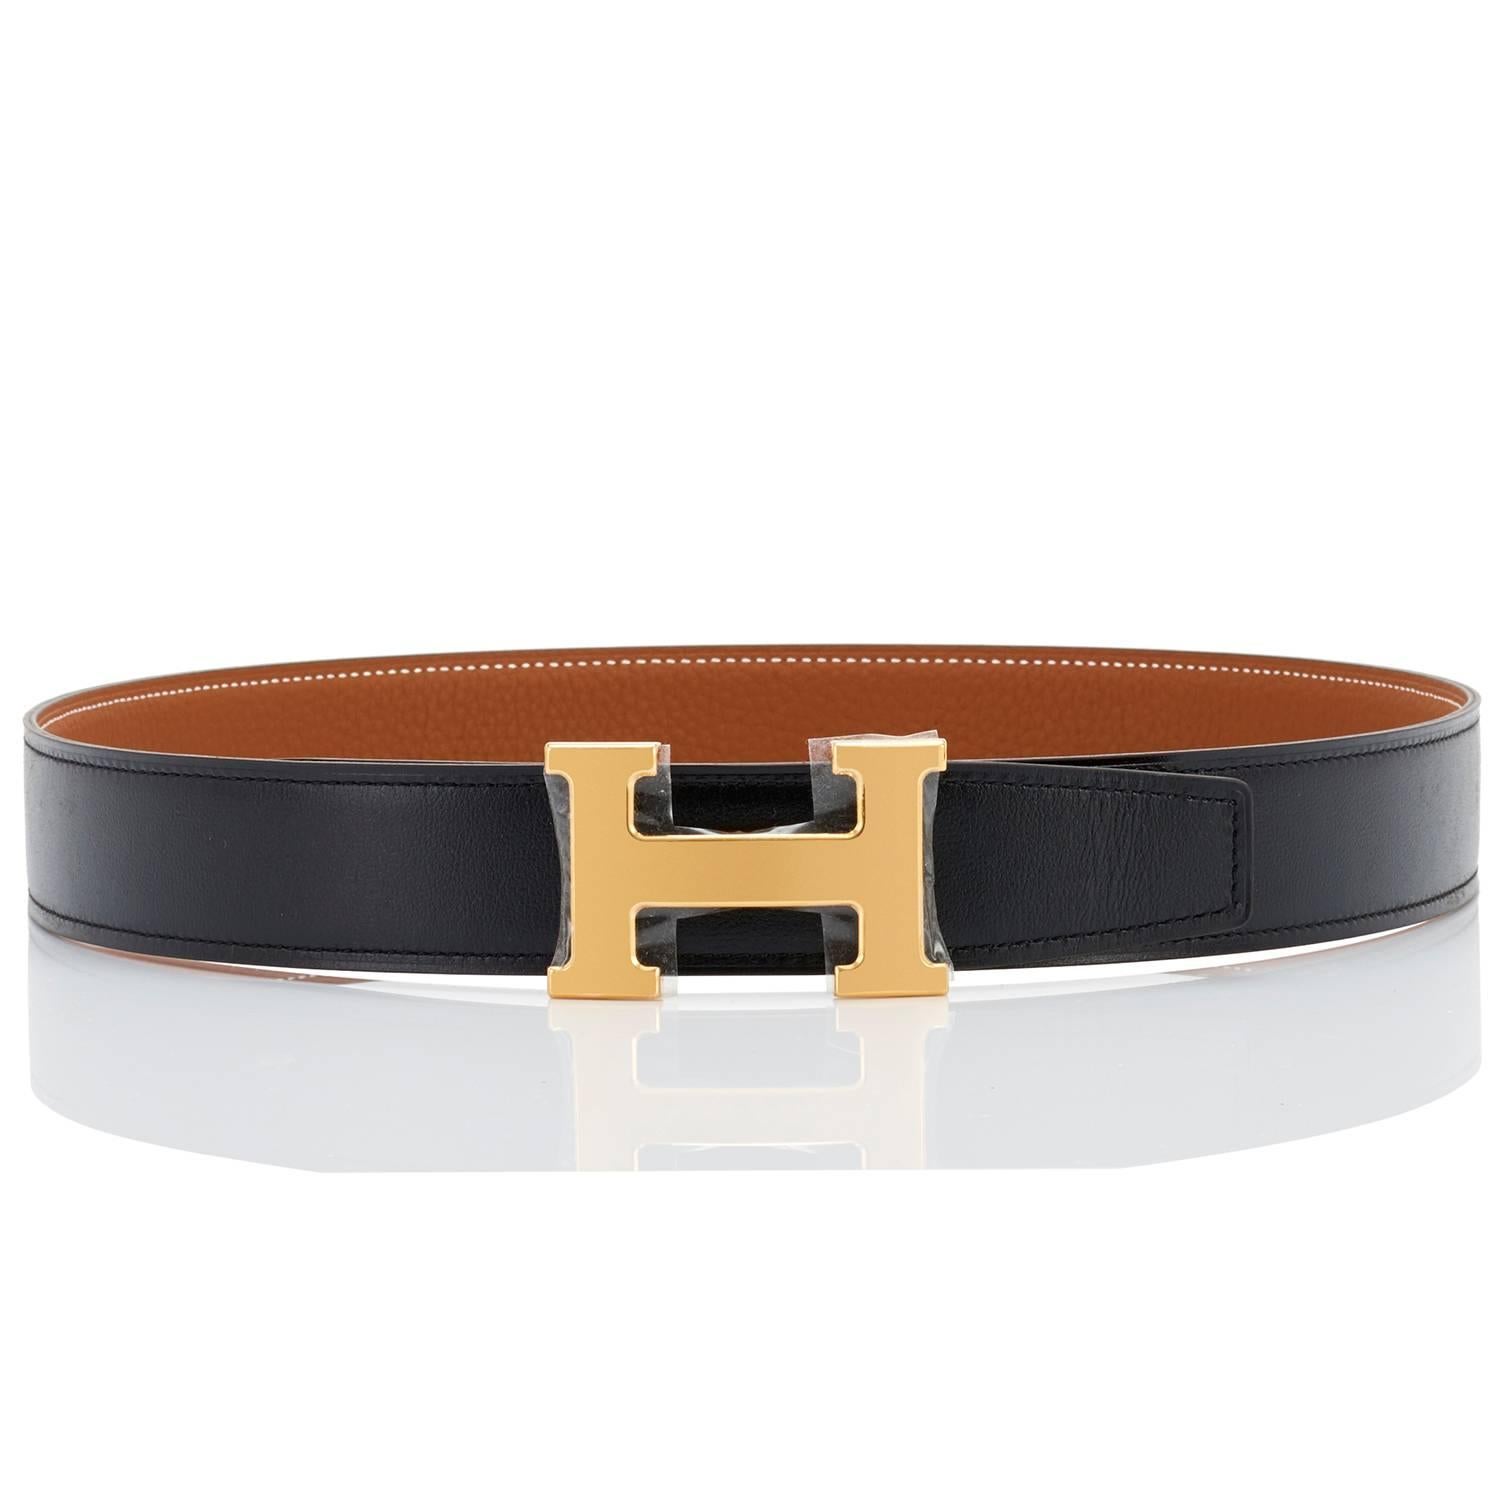 Hermes Gold and Black Reversible H 32mm Belt Kit Silver Buckle 85cm
Brand New in Box. Store Fresh. Pristine Condition.
Perfect gift! Belt kit comes in full set with reversible black and gold belt strap, gold buckle, Hermes dust bag for belt buckle,